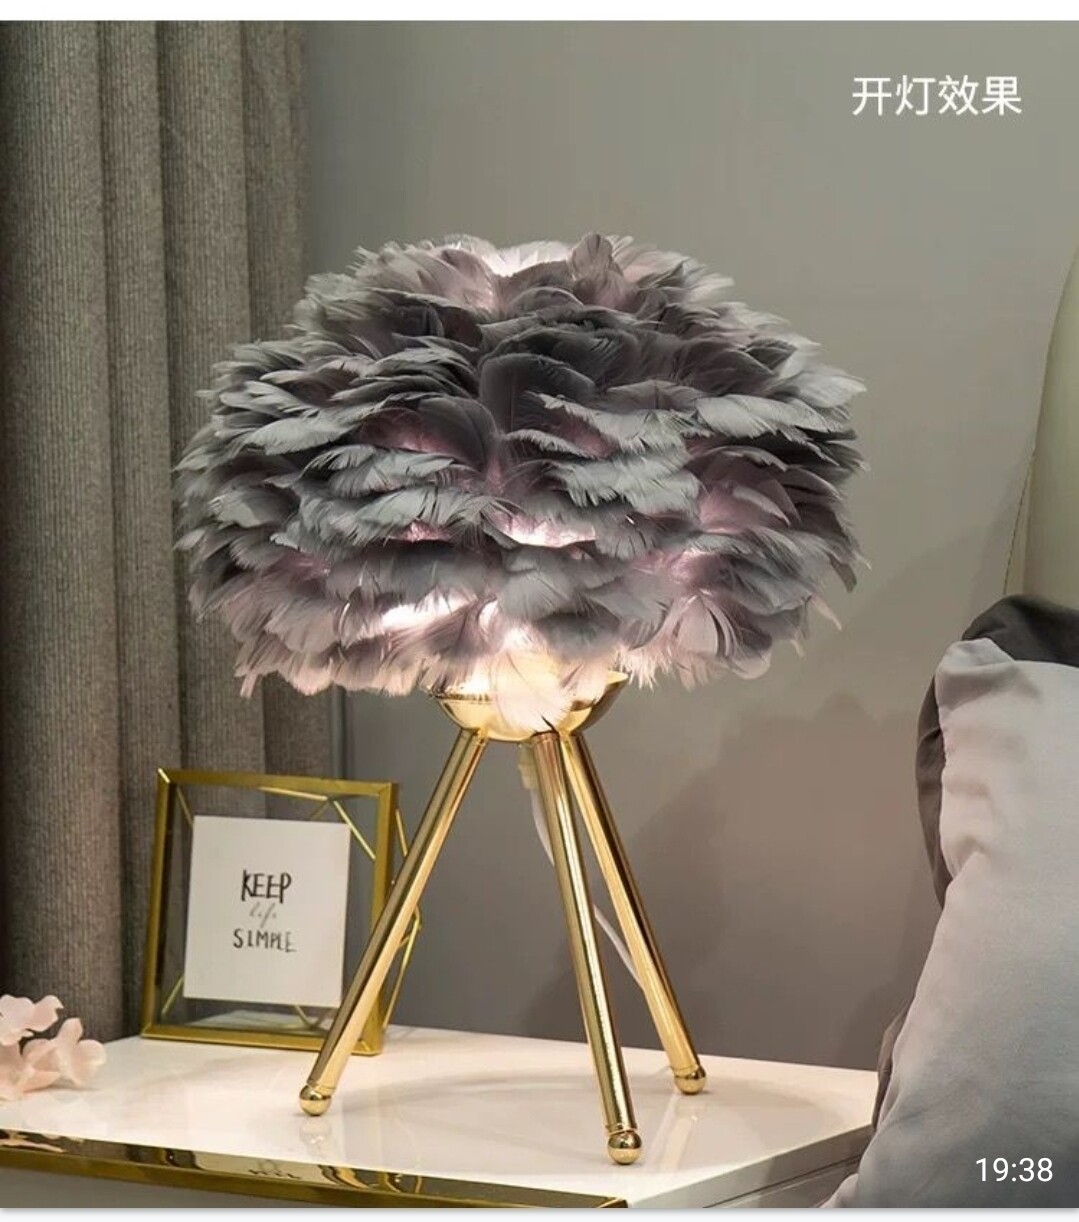 Generic LED Bedside Table Feather Lamp decorative Lamp. In gift box. GREY